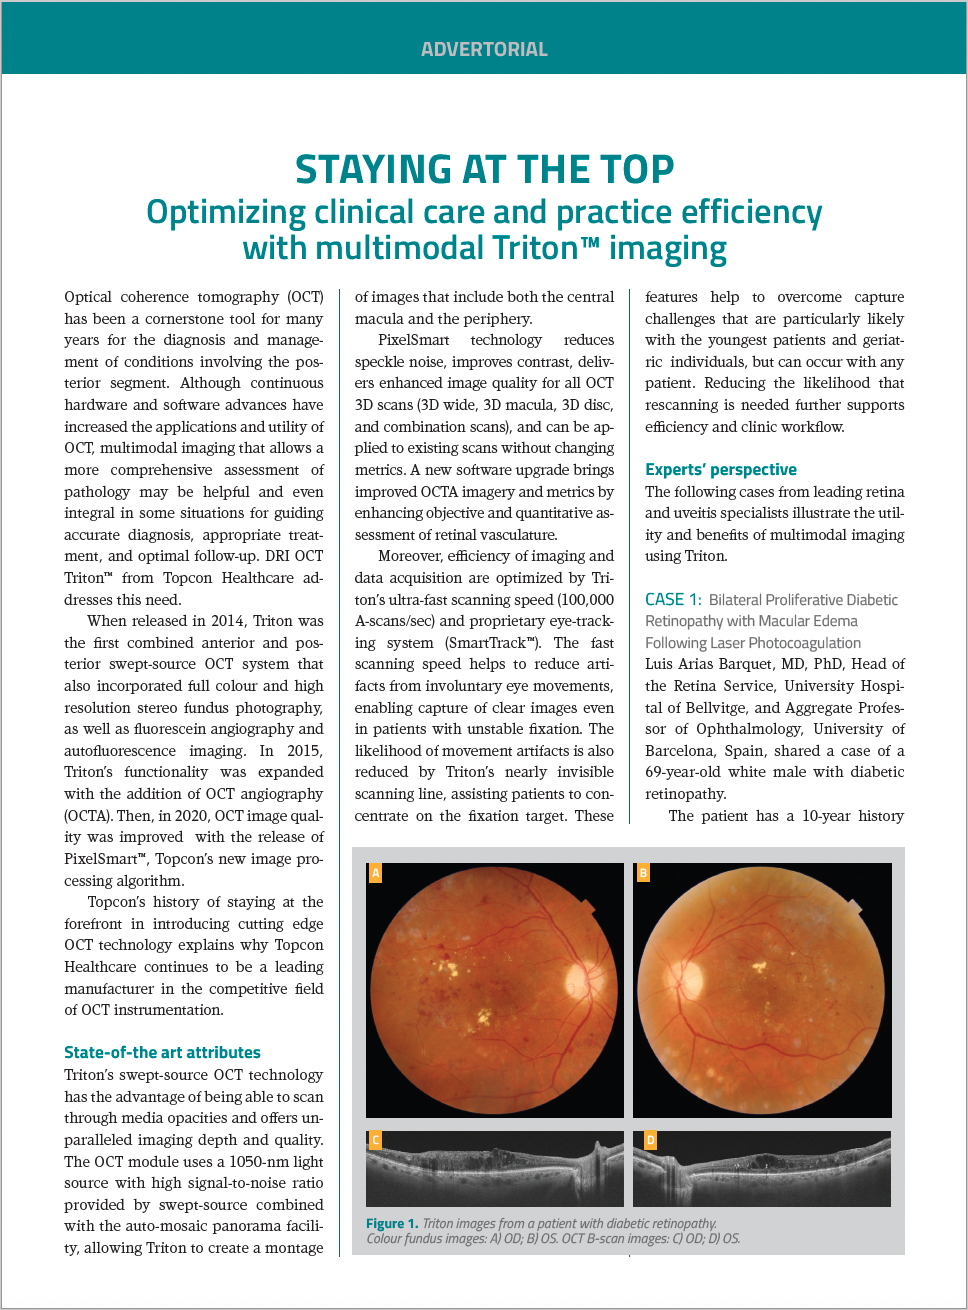 Staying at the top: Optimizing clinical care and practice efficiency with multimodal Triton™ imaging